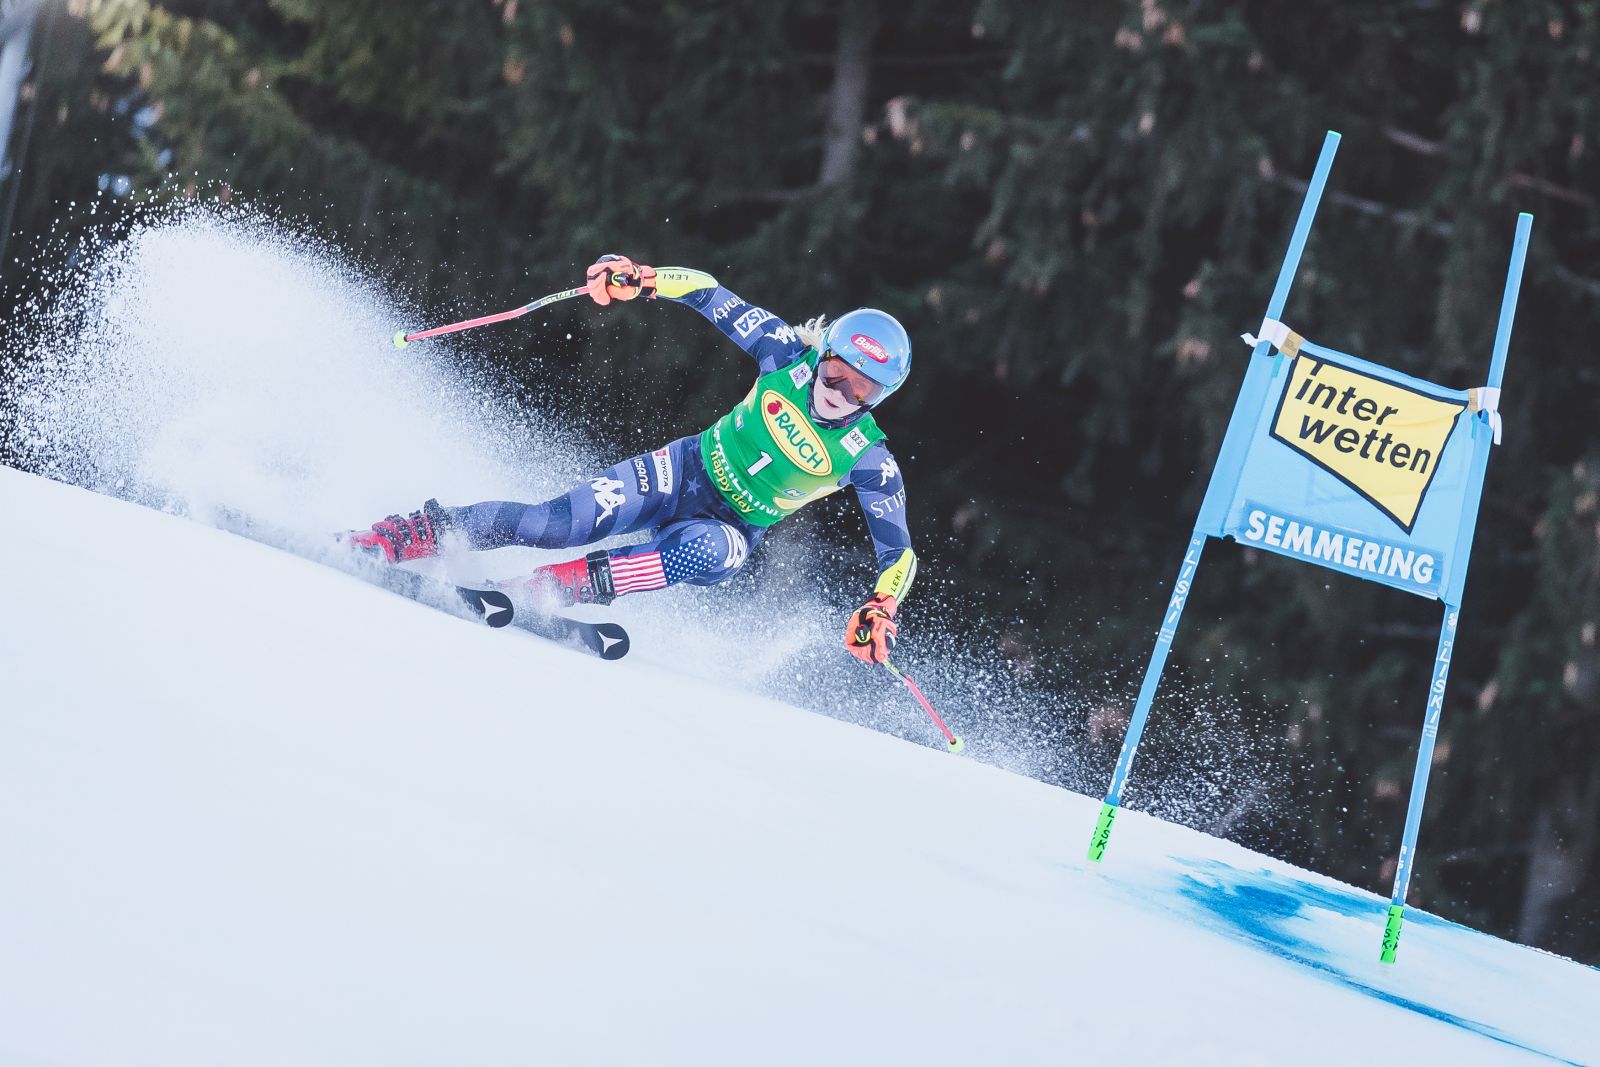 epa10379116 Mikaela Shiffrin of the USA in action during the first run of the Women's Giant Slalom of the FIS Ski Alpine World Cup in Semmering, Austria, 27 December 2022.  EPA/DOMINIK ANGERER